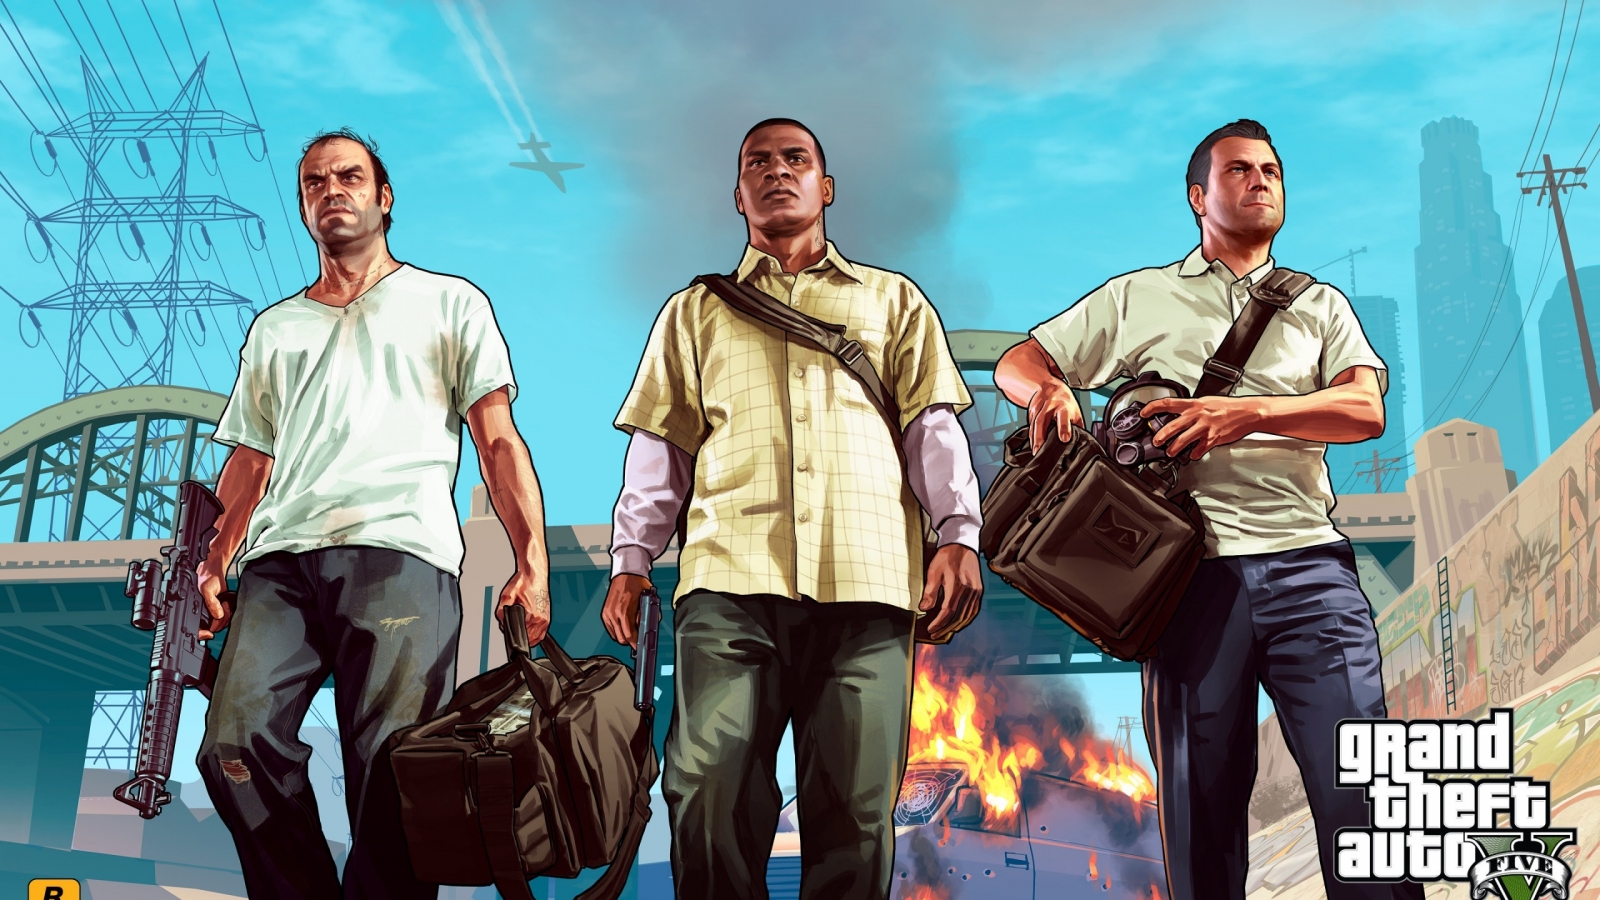 Grand Theft Auto Vice City for 1600 x 900 HDTV resolution